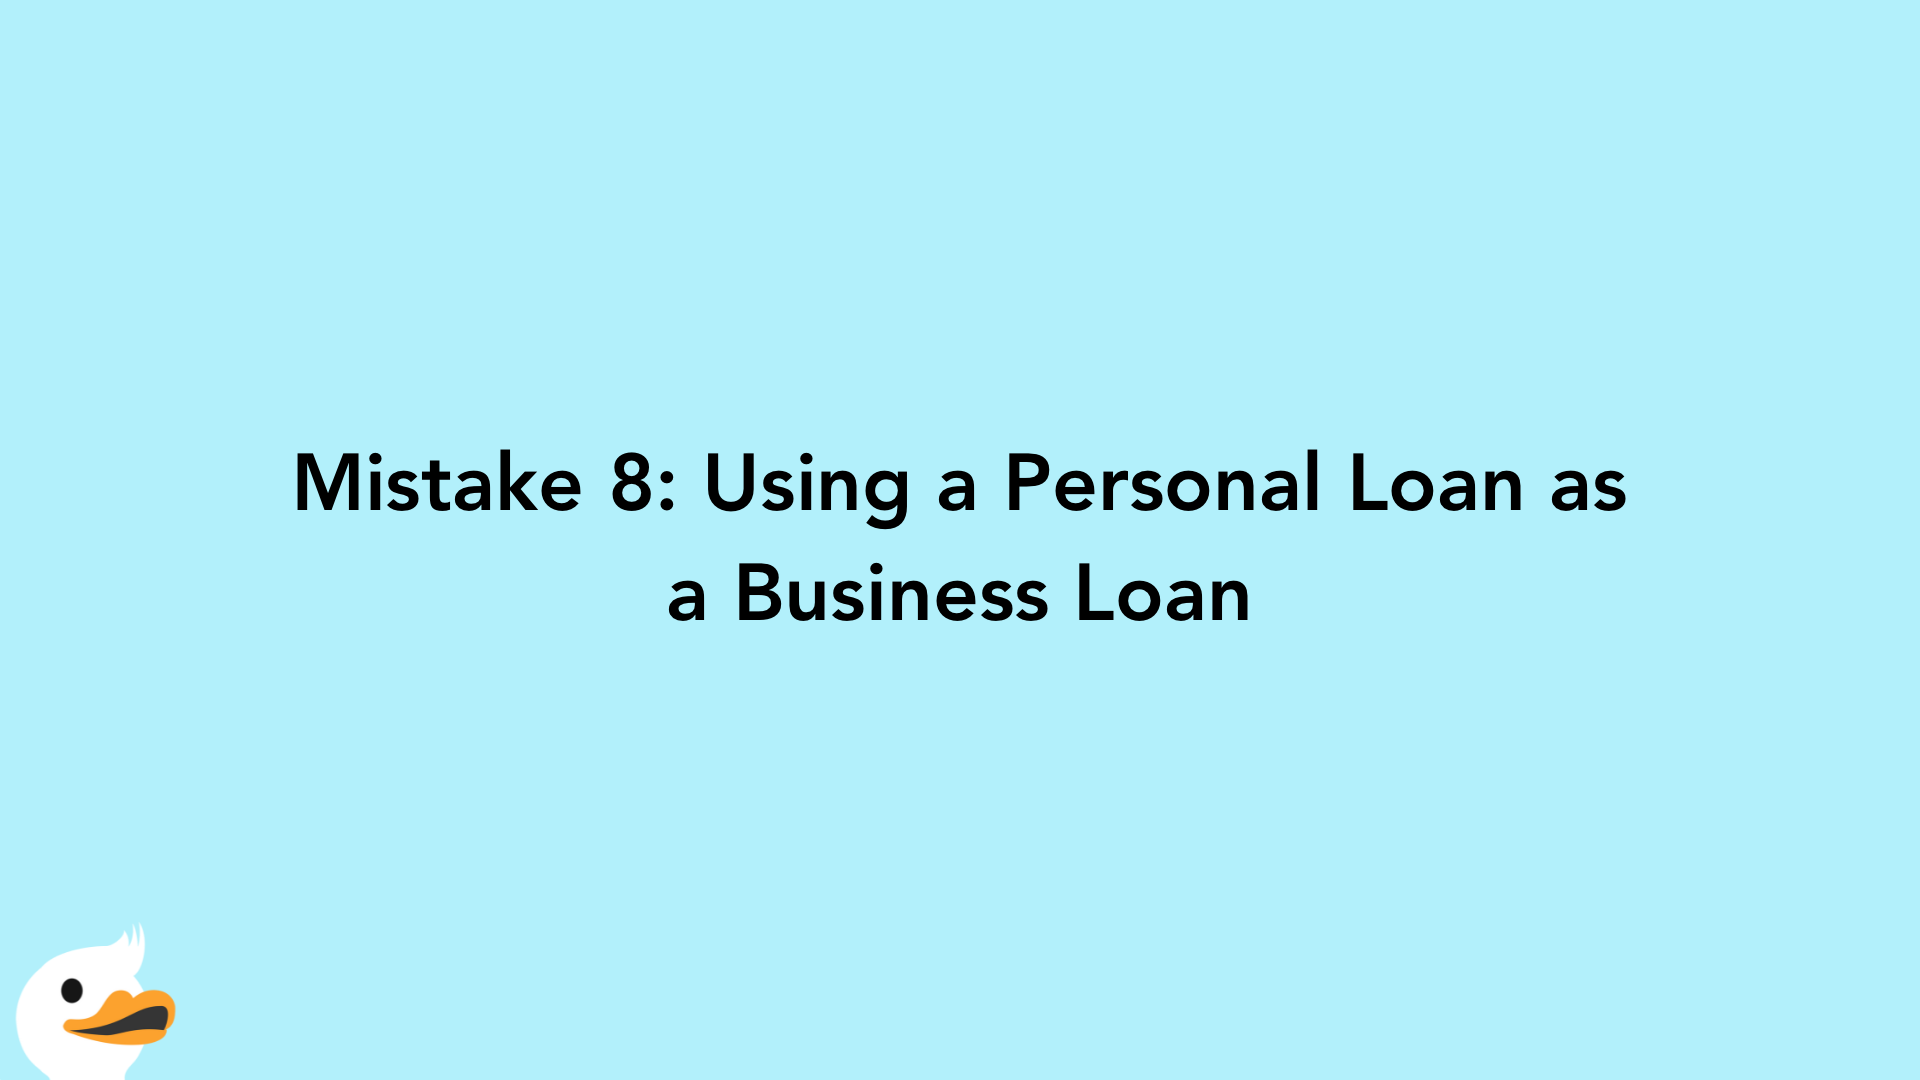 Mistake 8: Using a Personal Loan as a Business Loan